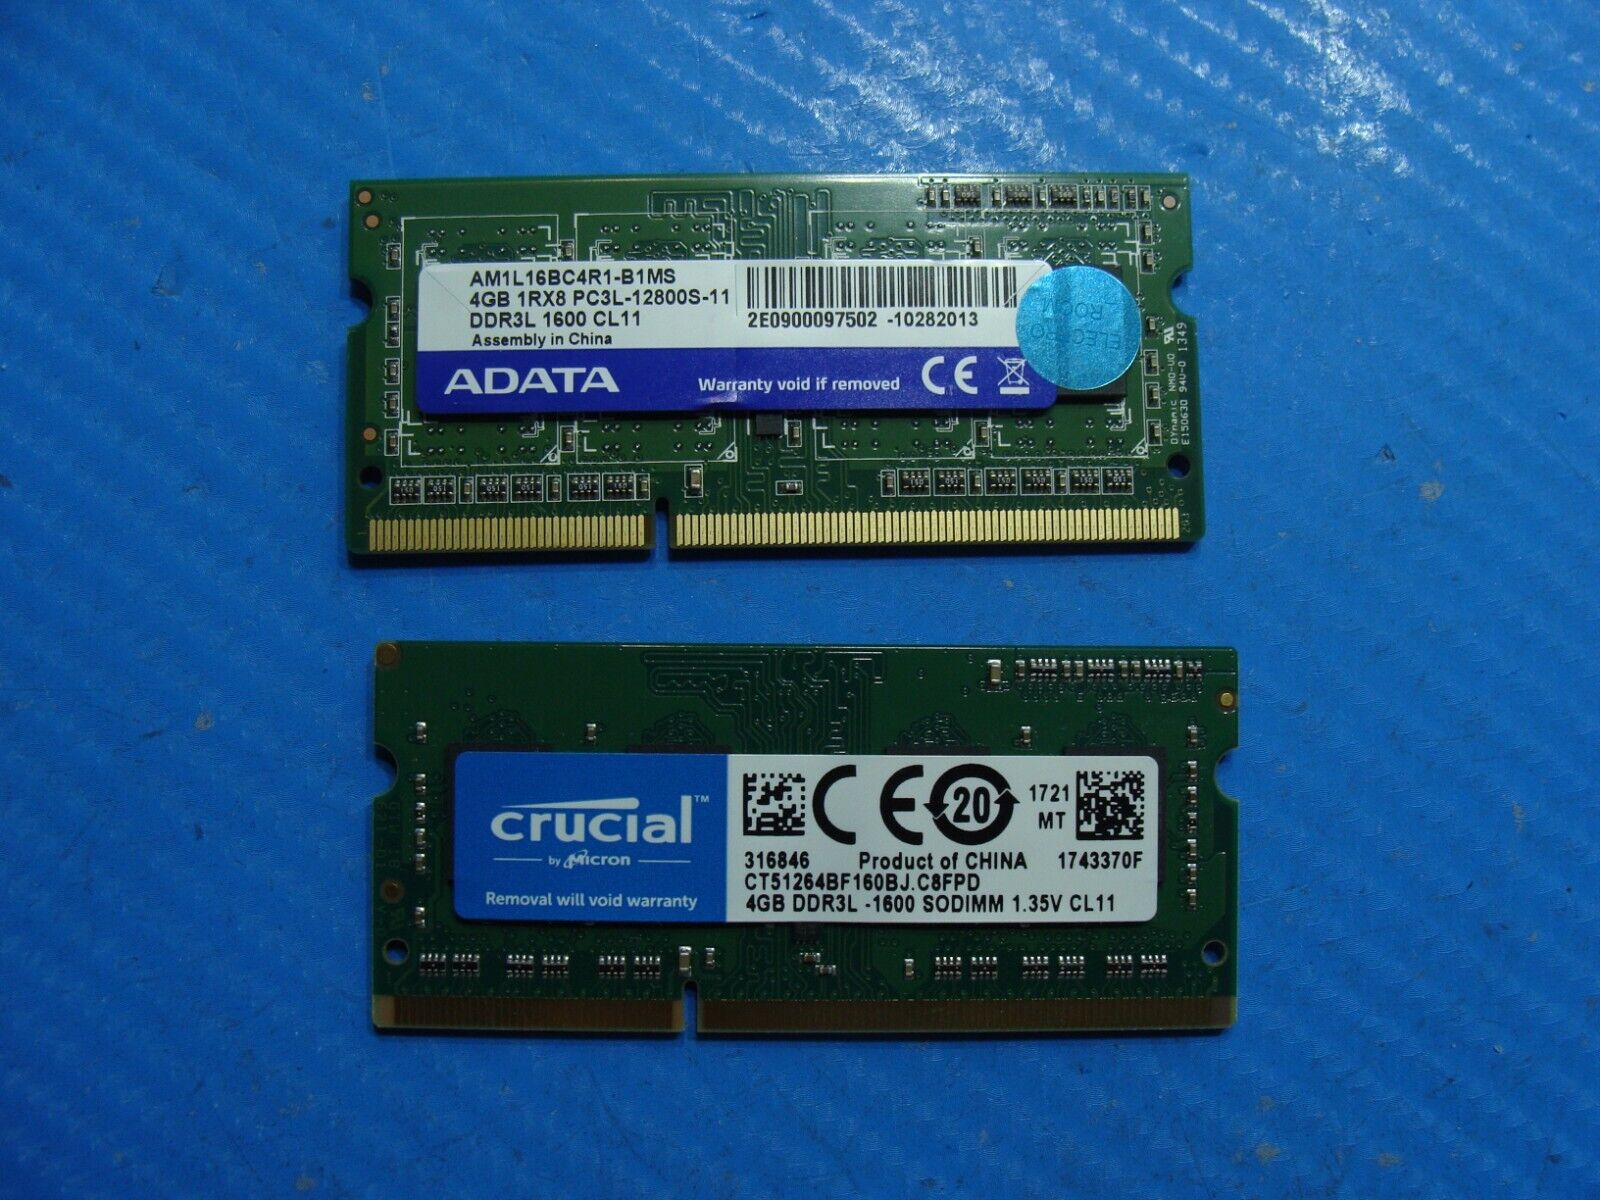 HP 17-e112dx 8GB 2x4GB SODIMM Memory RAM AM1L16BC4R1-B1MS CT51264BF160BJ.C8FPD